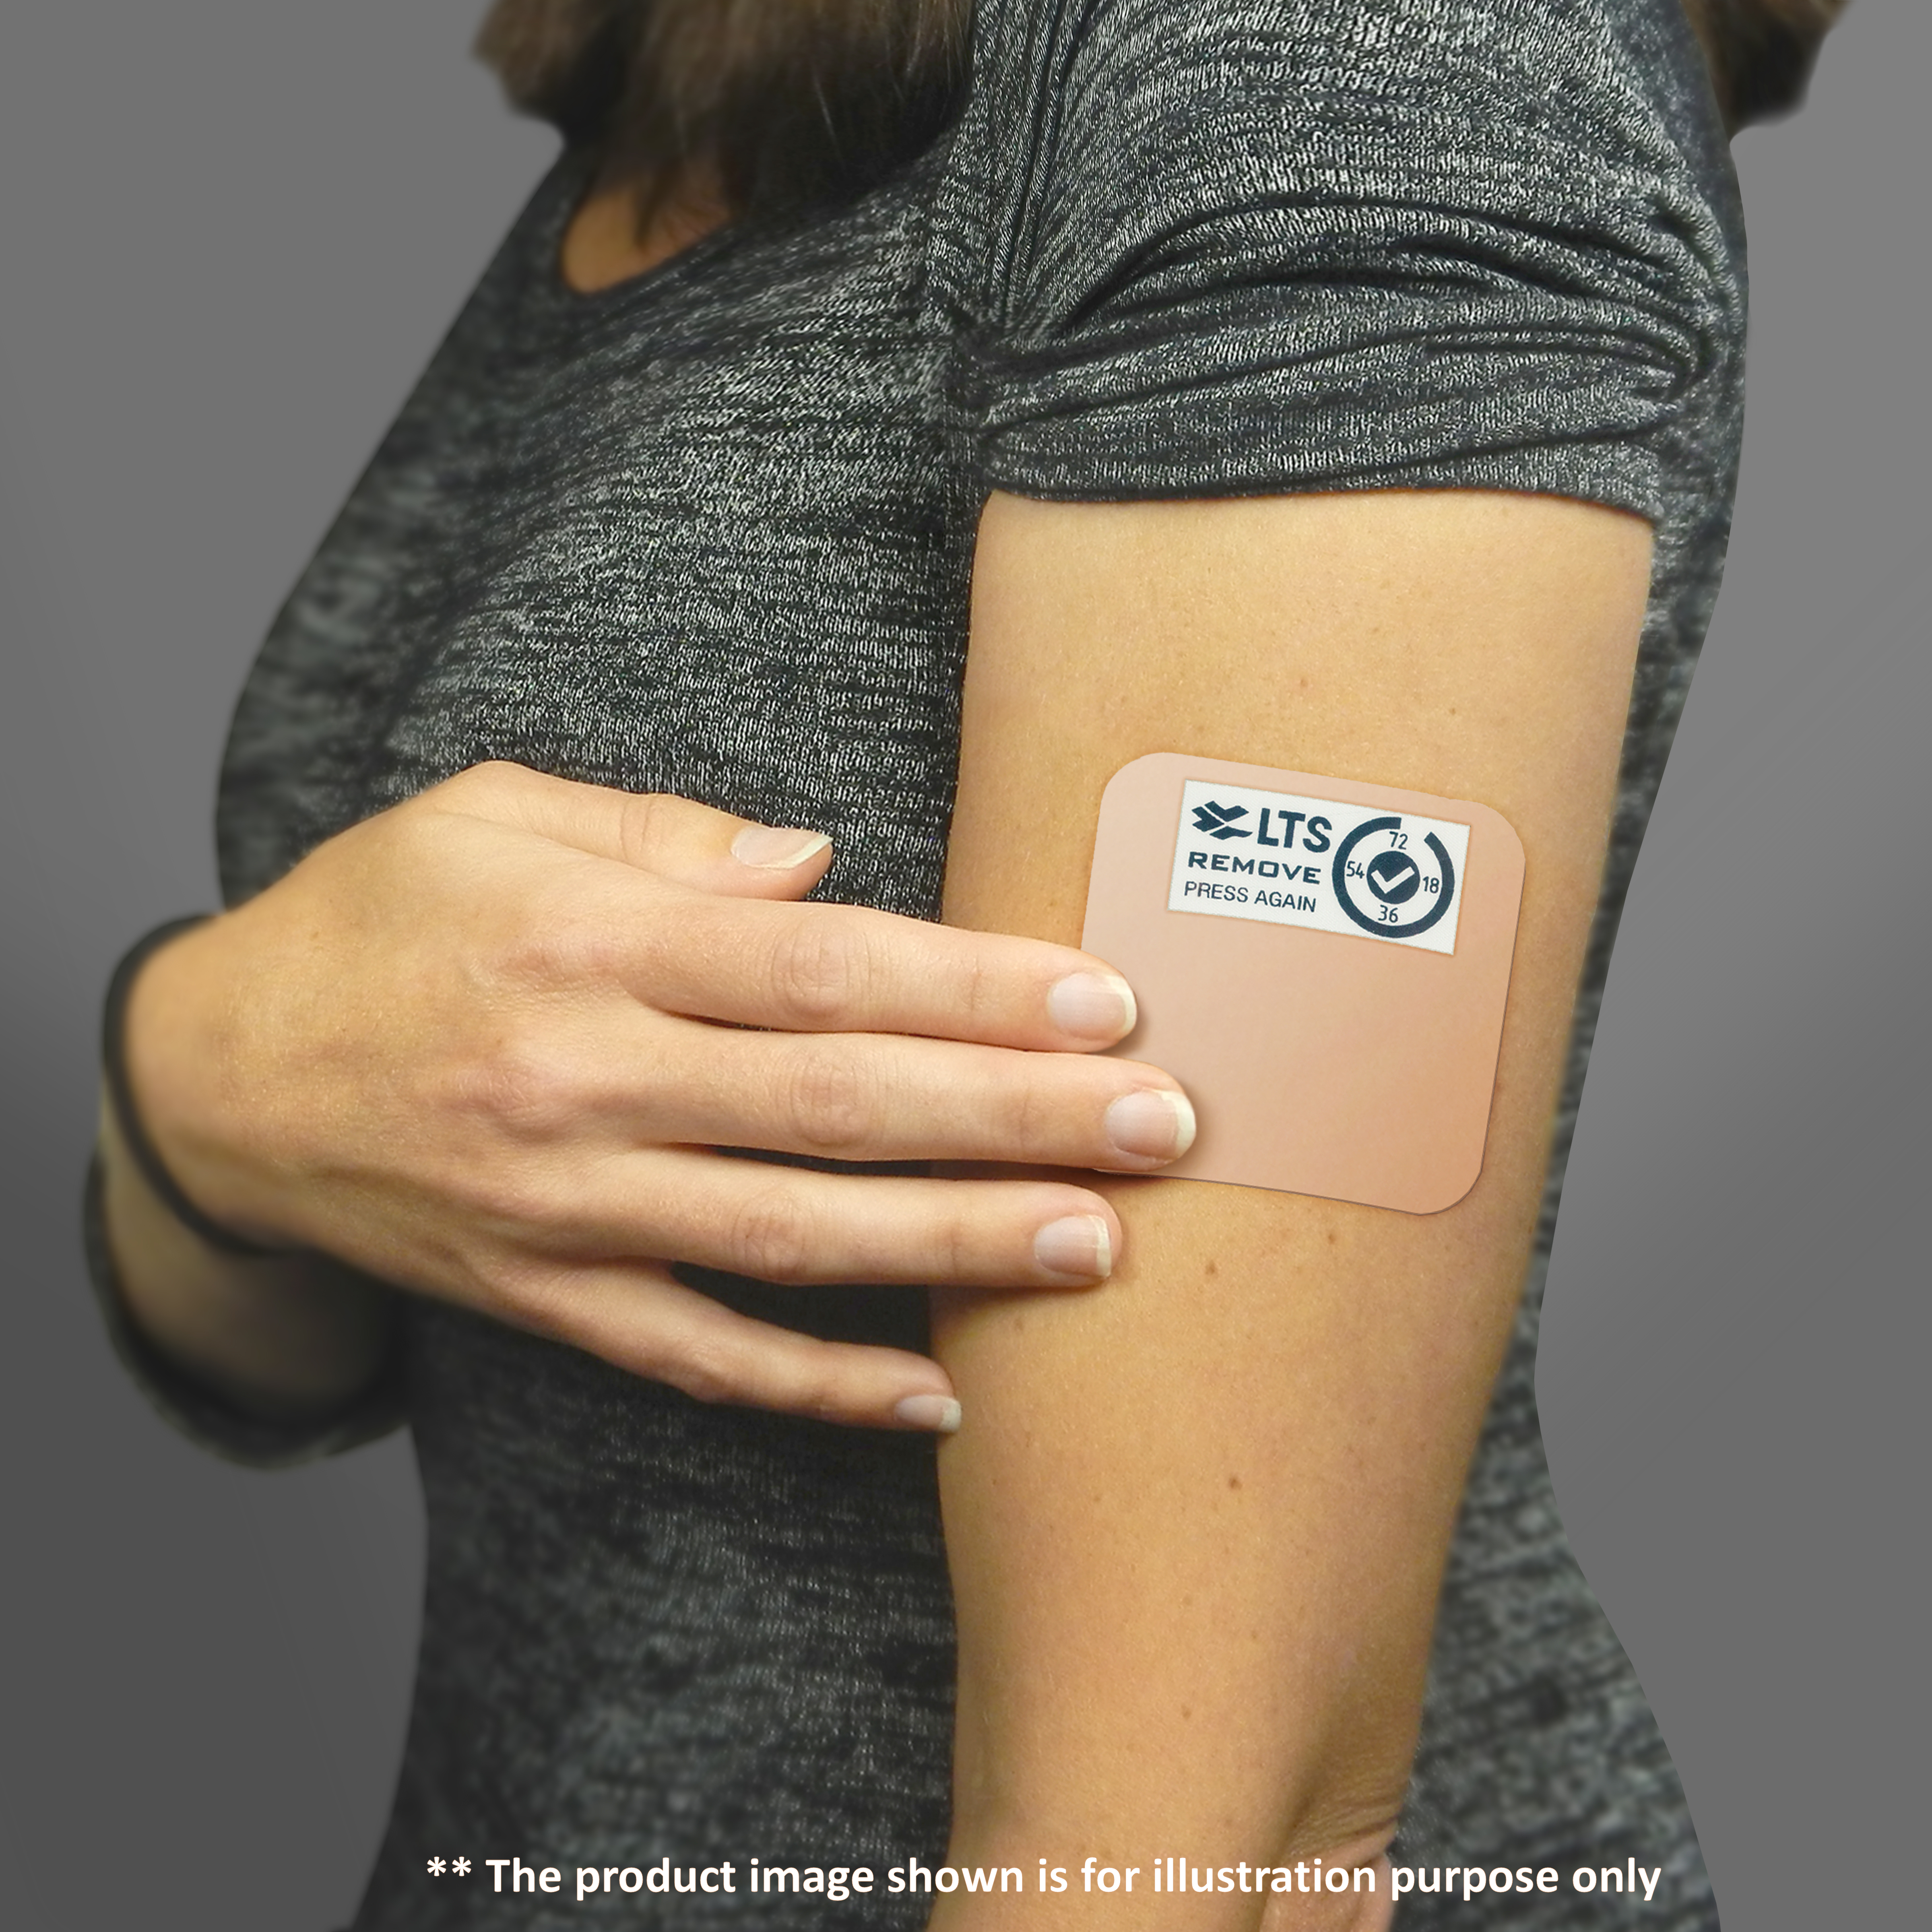 E Ink and LTS Partner to Develop Smart Patch to Improve Medical Management